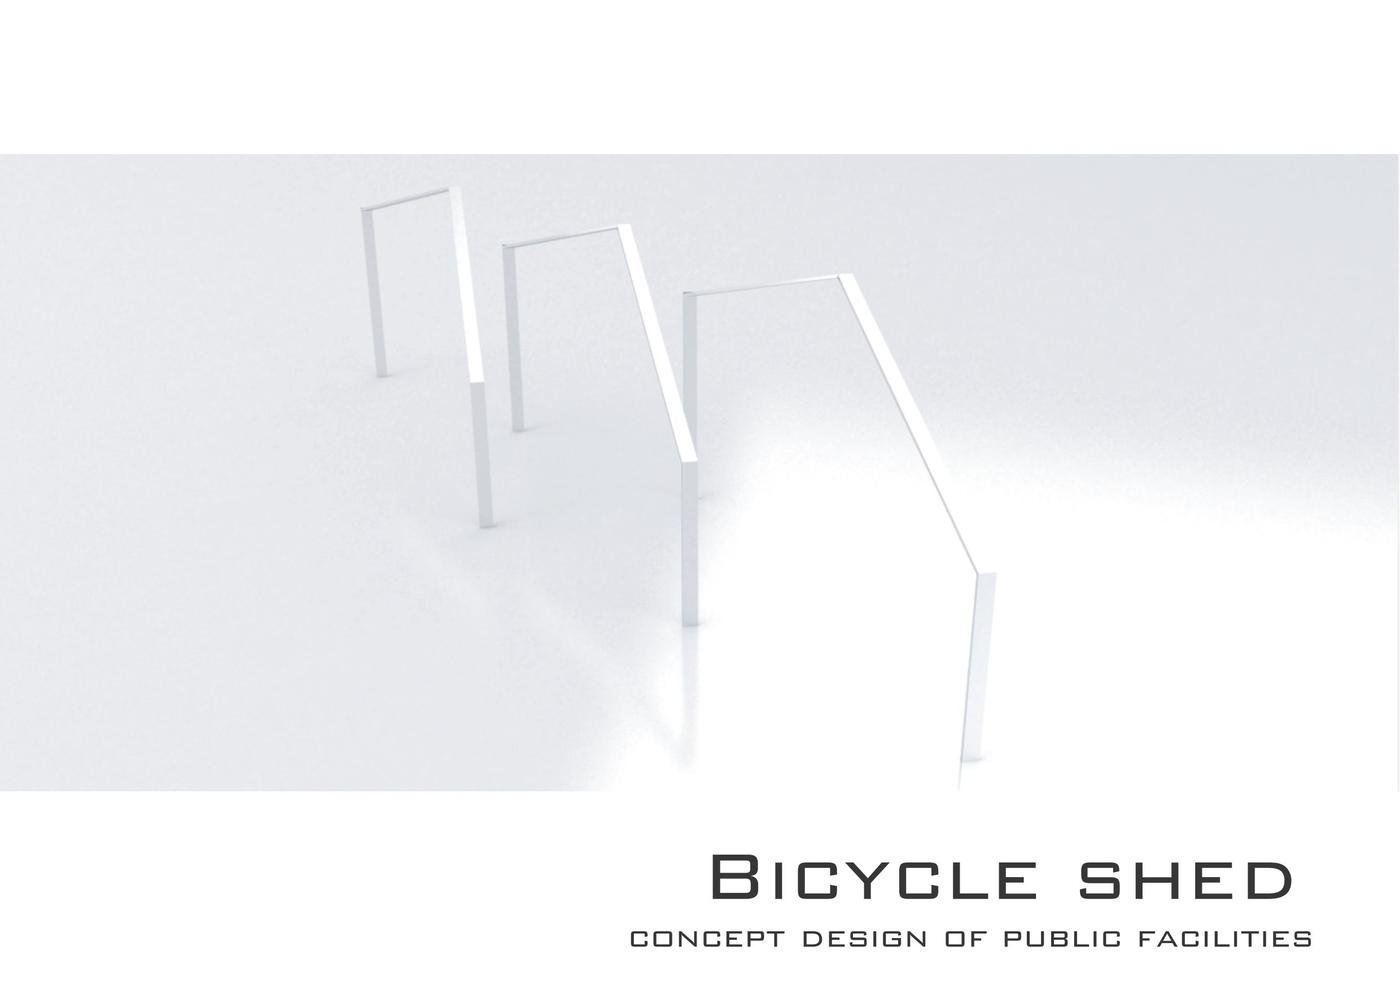 Bicycle shed イメージ 1